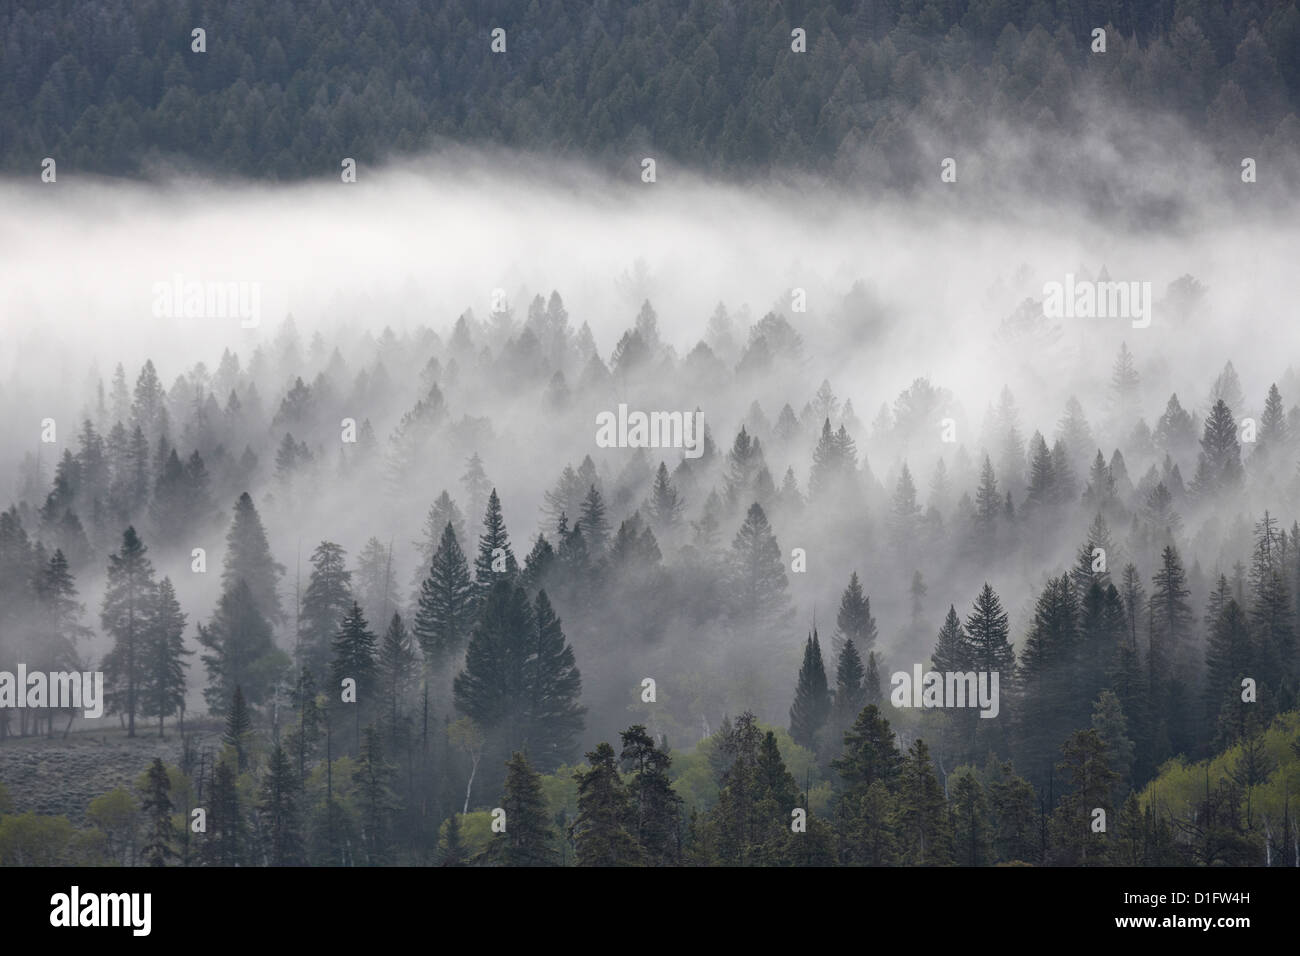 Fog mingling with evergreen trees, Yellowstone National Park, Wyoming, United States of America, North America Stock Photo